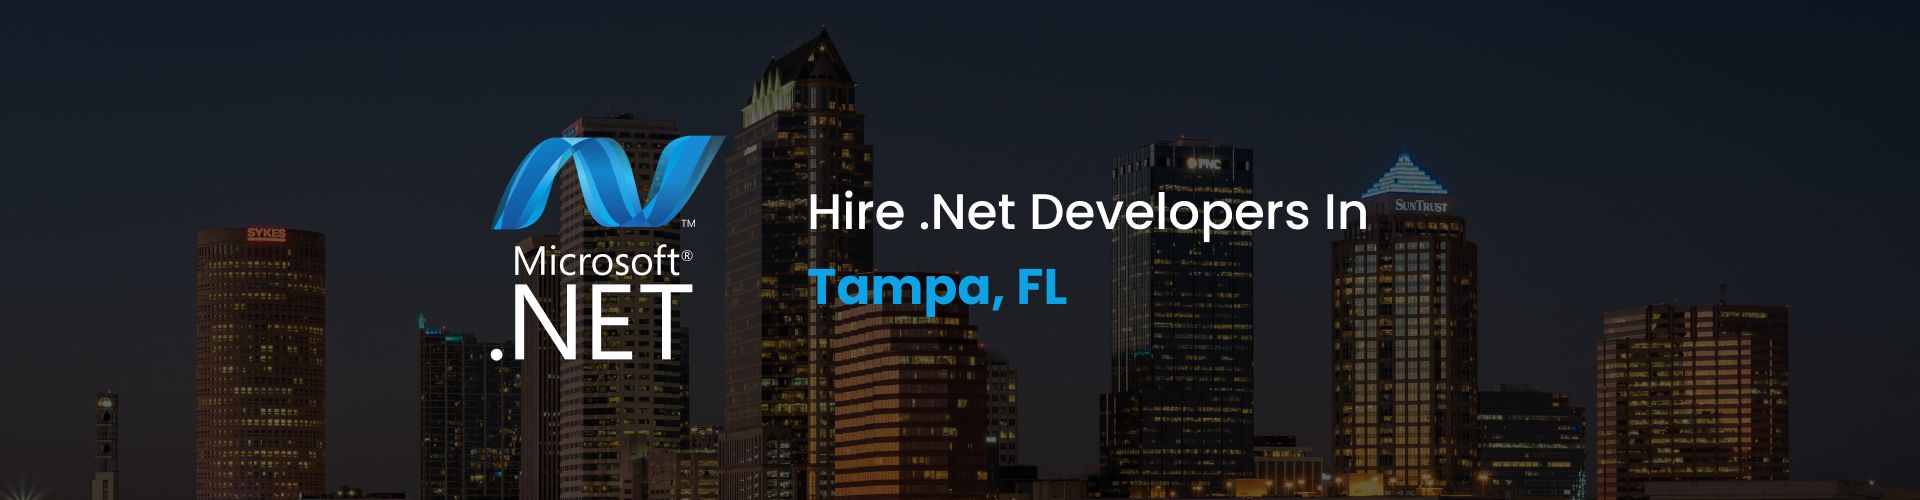 hire dot net developers in tampa